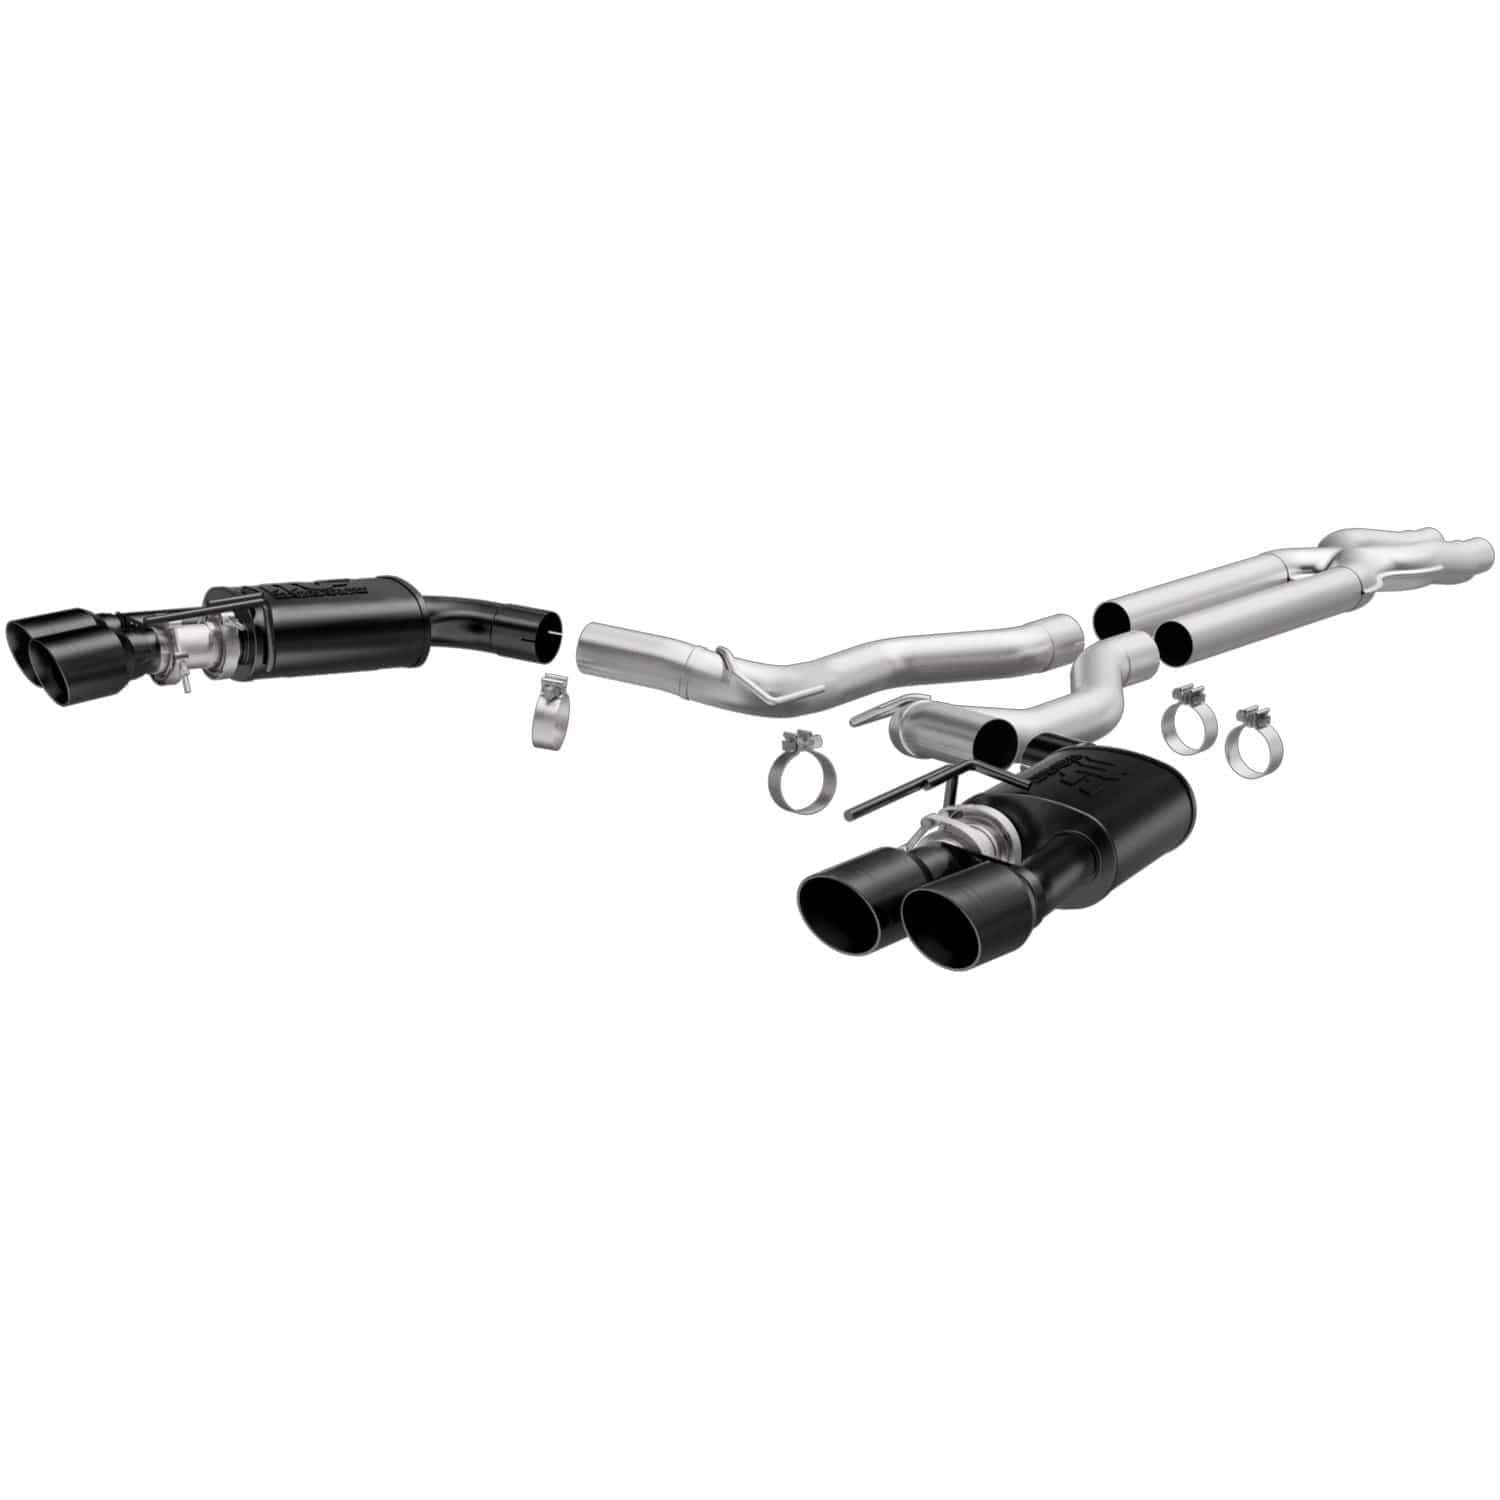 Magnaflow Competition Series Cat-Back for Mustang V8 5.0L 2018-21 | #19369MF.  Available from NEMESISUK.COM